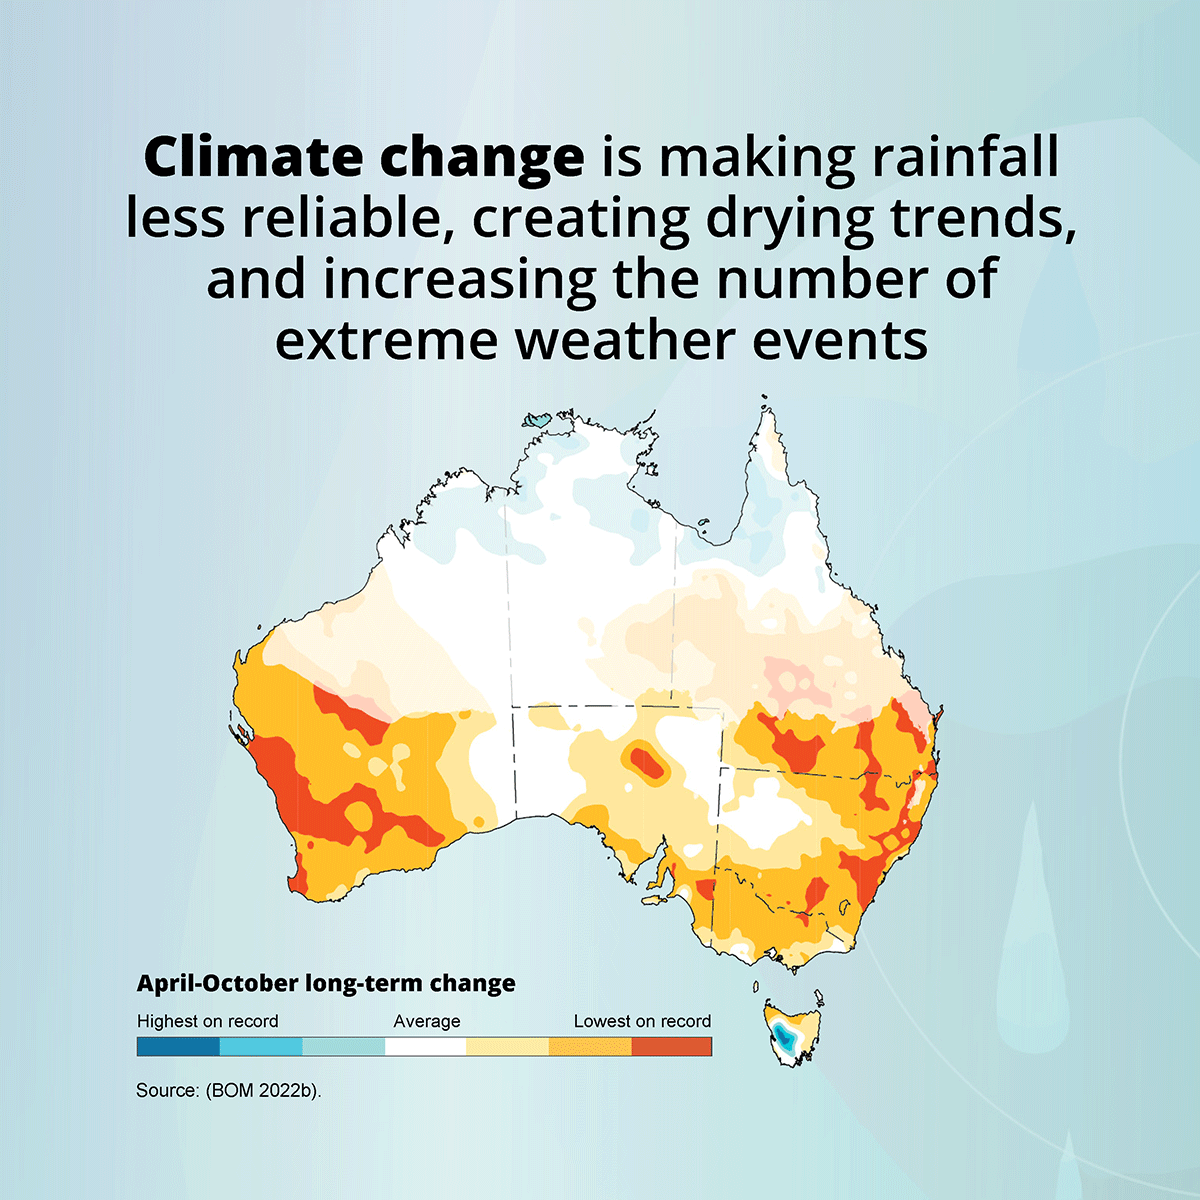 Climate change is making rainfall less reliable, creating drying trends,
and increasing the number of extreme weather events. Map of Australia sourced from BoM 2022b showing areas of long-term rainfall change for April to October.